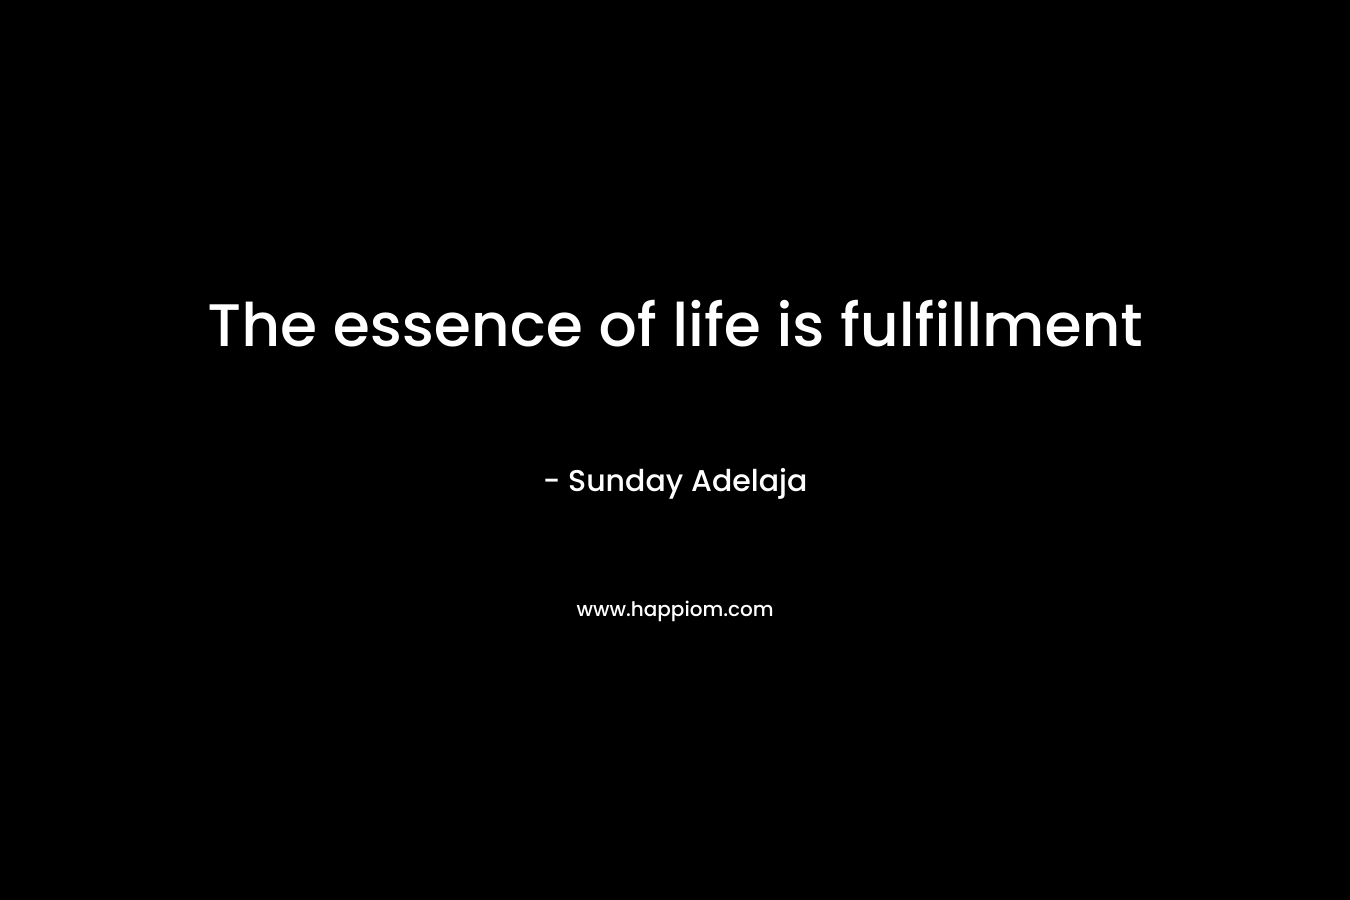 The essence of life is fulfillment